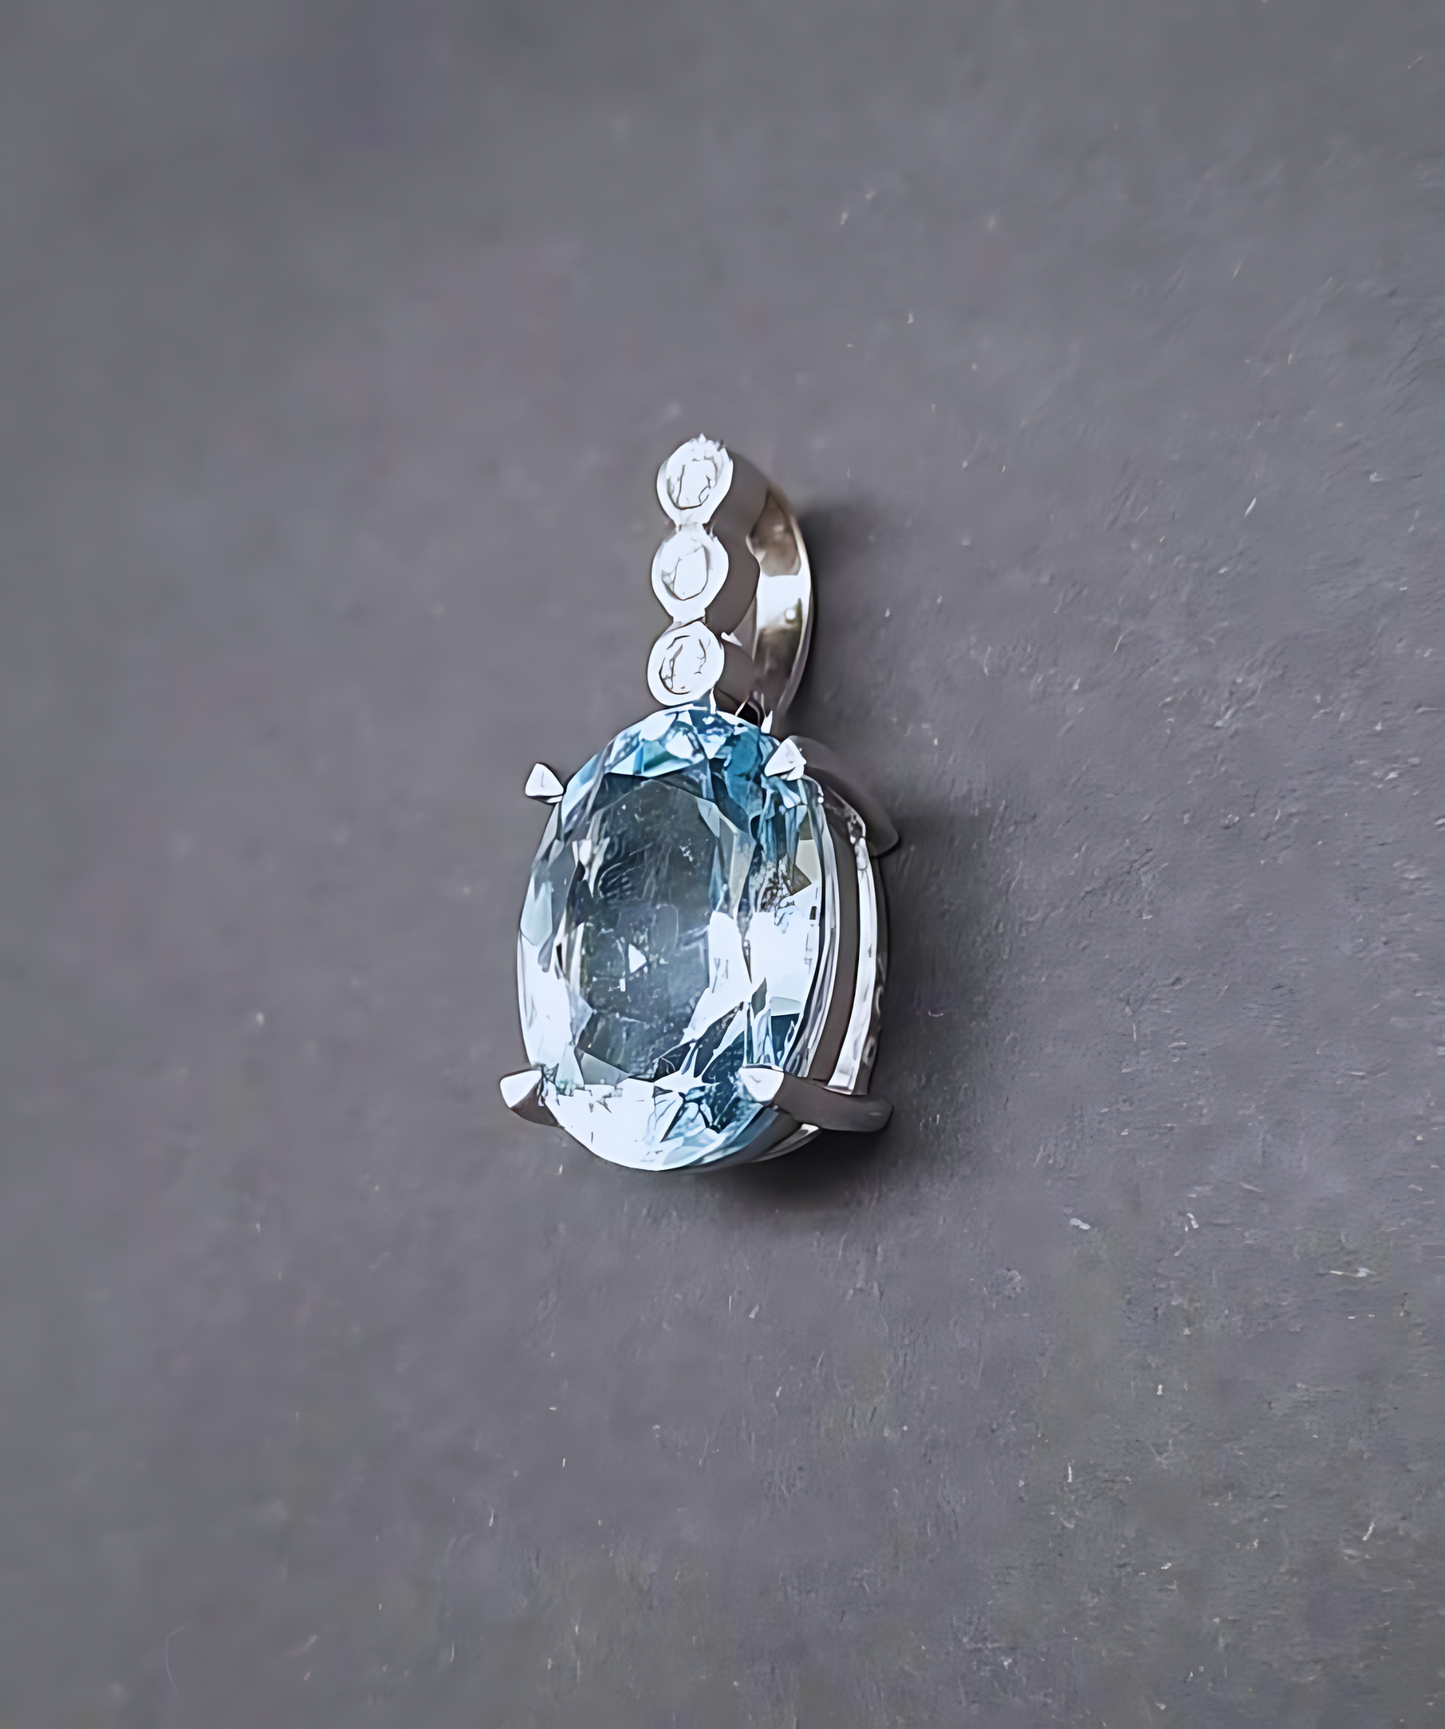 Handmade 18K white gold pendant for necklace with 3.54 ct. natural Aquamarine & natural Vvs1 high quality Diamonds.